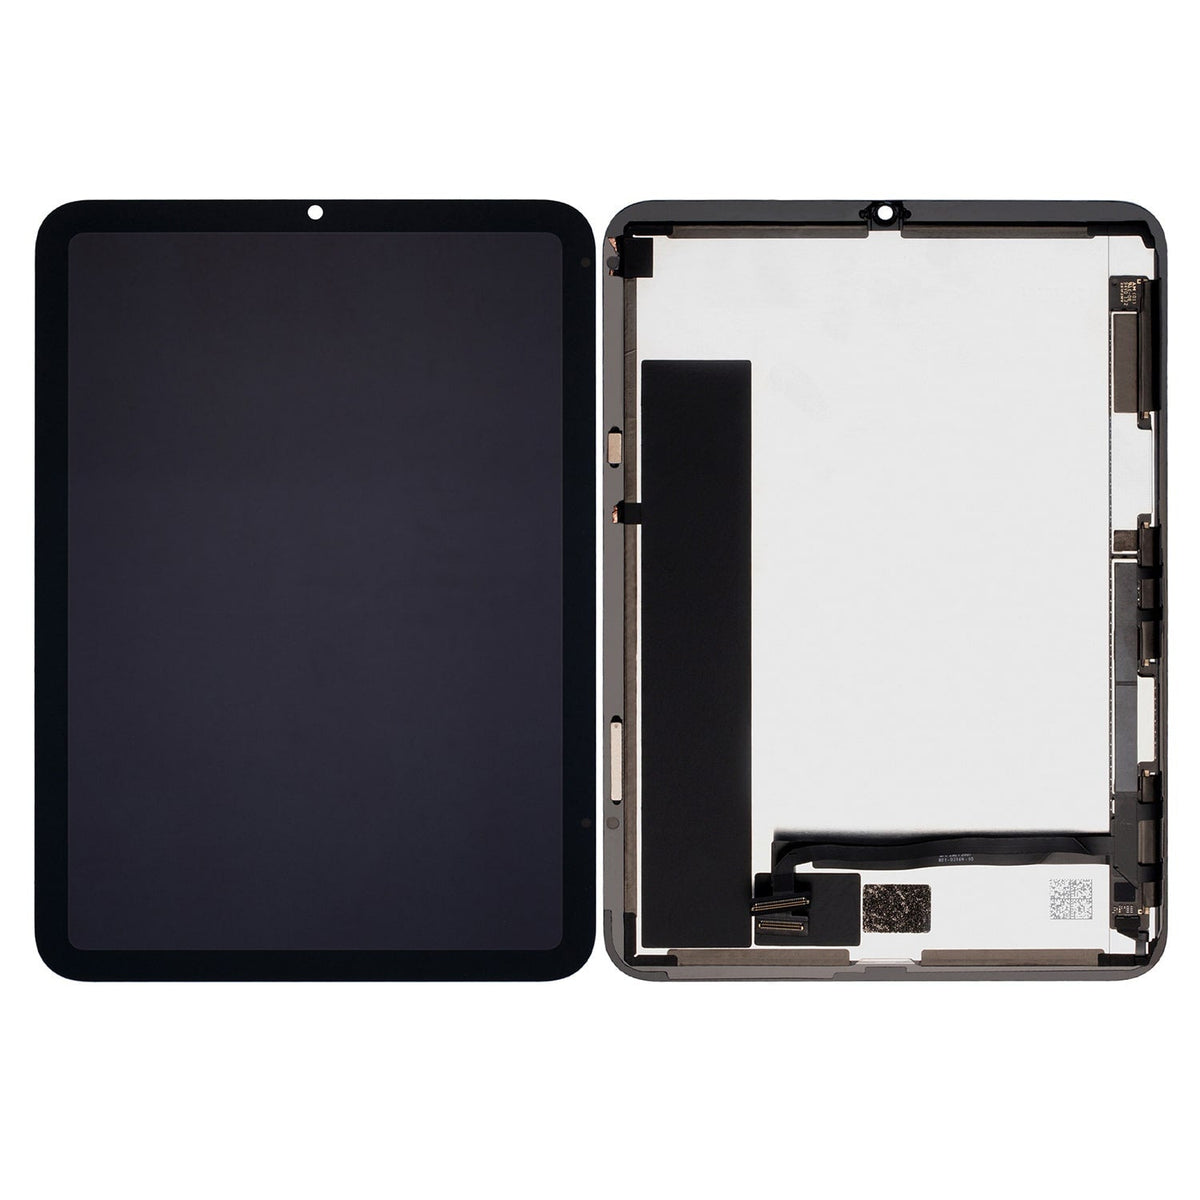 LCD WITH DIGITIZER ASSEMBLY FOR IPAD MINI 6 - BLACK